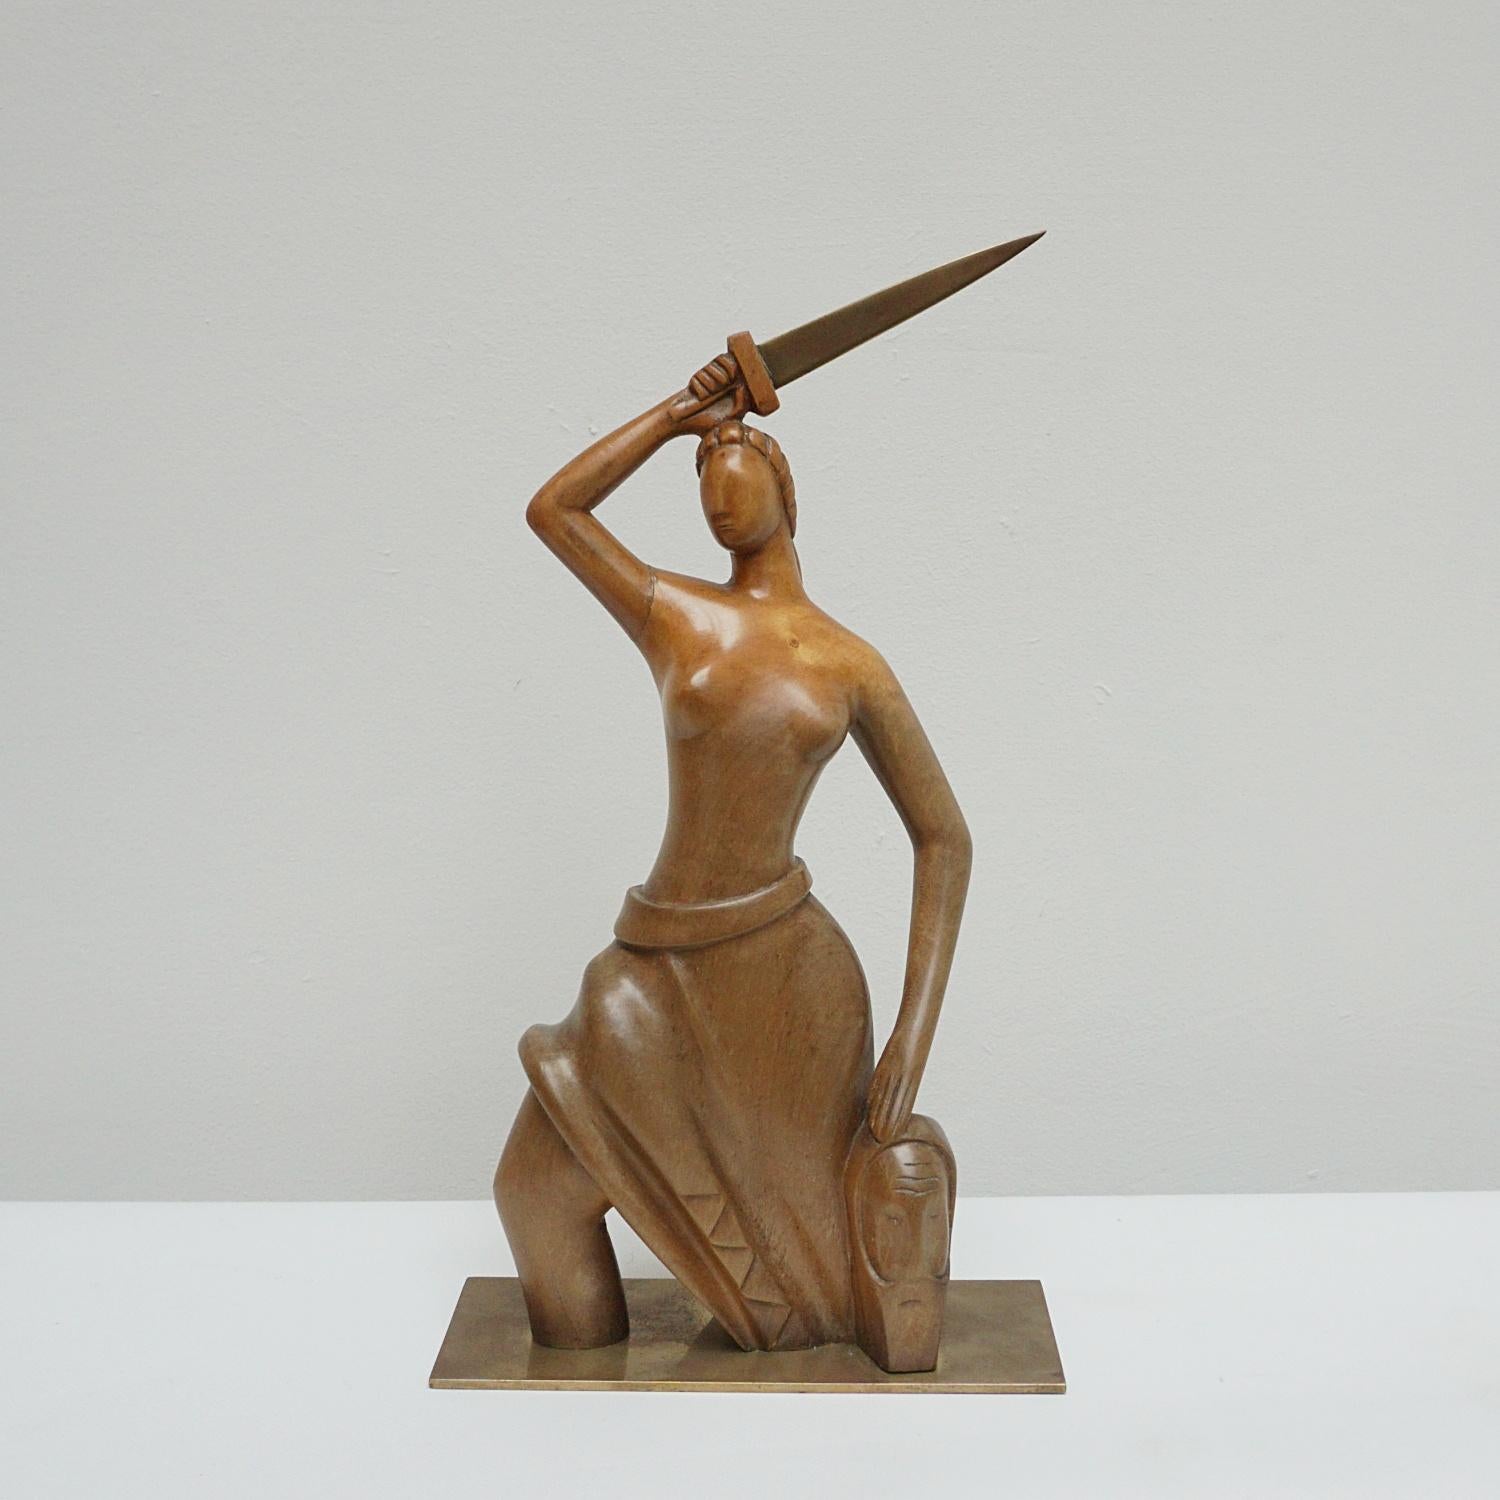 An Art Deco sculpture by Hungarian designer Laszlo Hoenig (1905-1971). A Carved wooden study of a stylised semi nude figure holding a bronze sword and tribal mask. Highly polished walnut set over a bronze base. Stamped 'LAHO LONDON' to